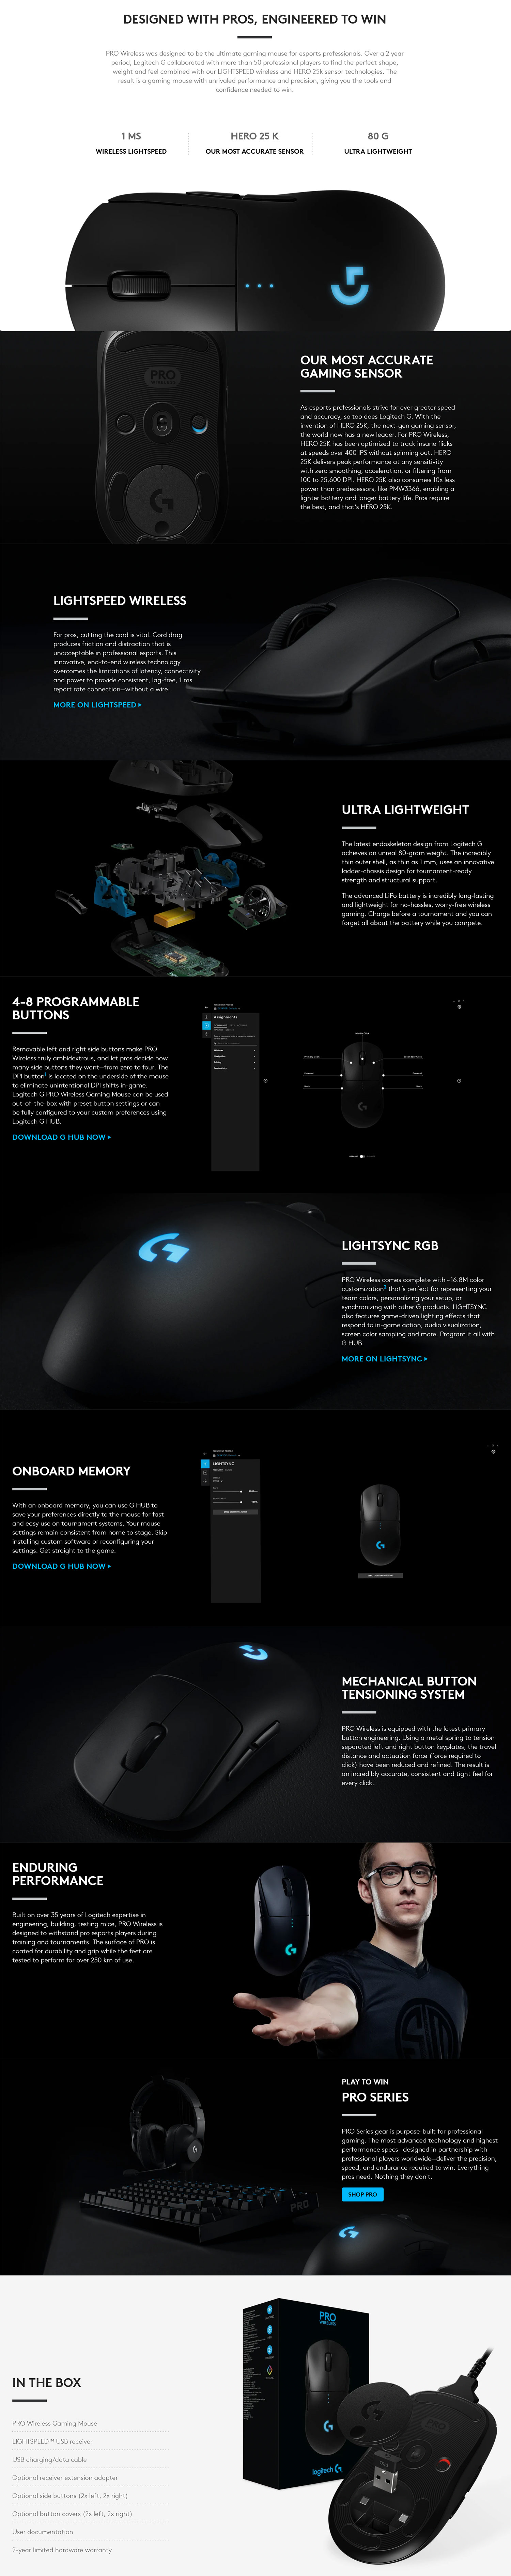 Logitech G Pro Wireless Gaming Mouse RGB 910-005274 Details